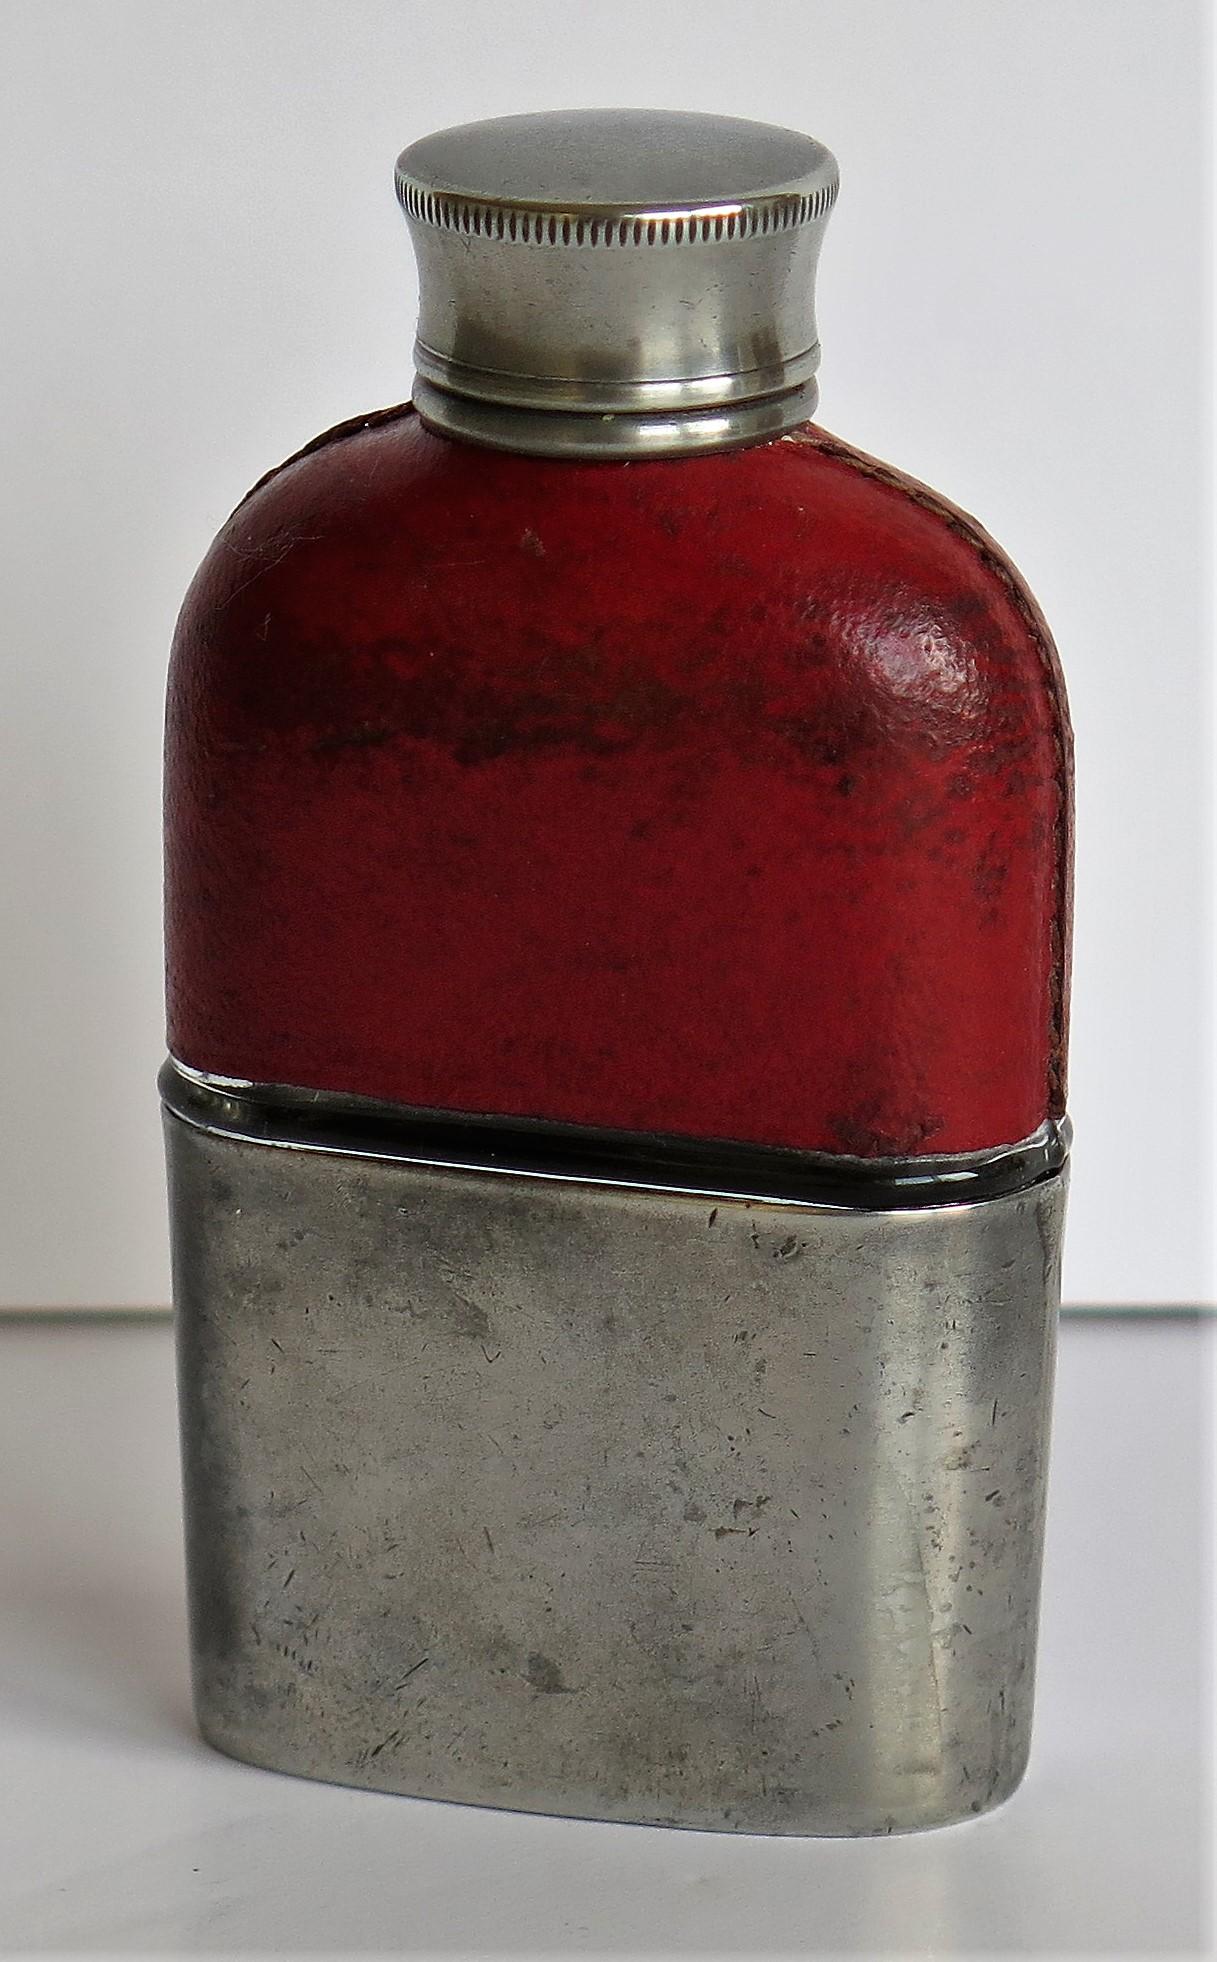 This is a small ladies antique hip flask of English make and 1.5 oz volume, dating to the late 19th century of Victorian, England.

The flask is made of moulded glass which has a red leather upper section and a pewter base, the base also acting as